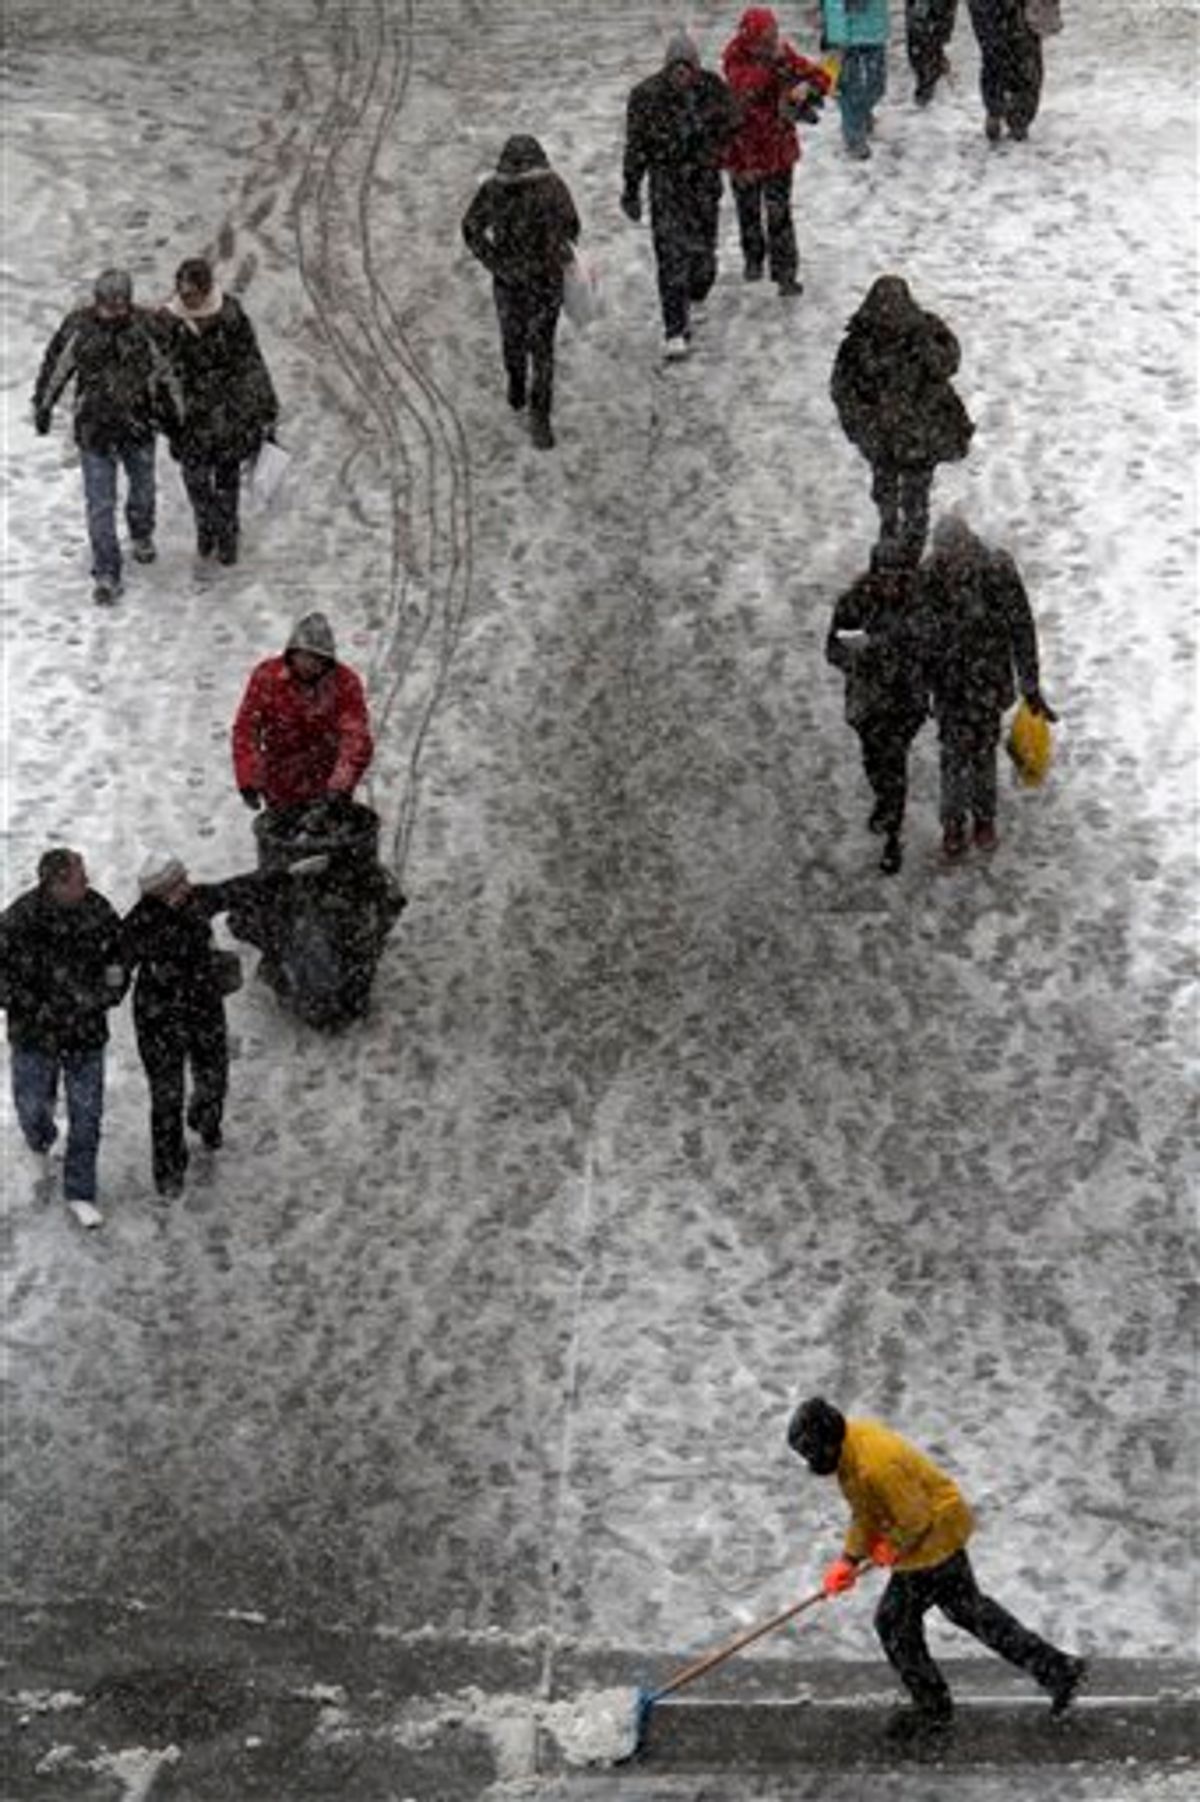 A maintenance worker clears snow from the sidewalk during a snowstorm on Broadway in New York's Times Square,  Sunday, Dec. 26, 2010 in New York.  (AP Photo/Mary Altaffer)  (AP)